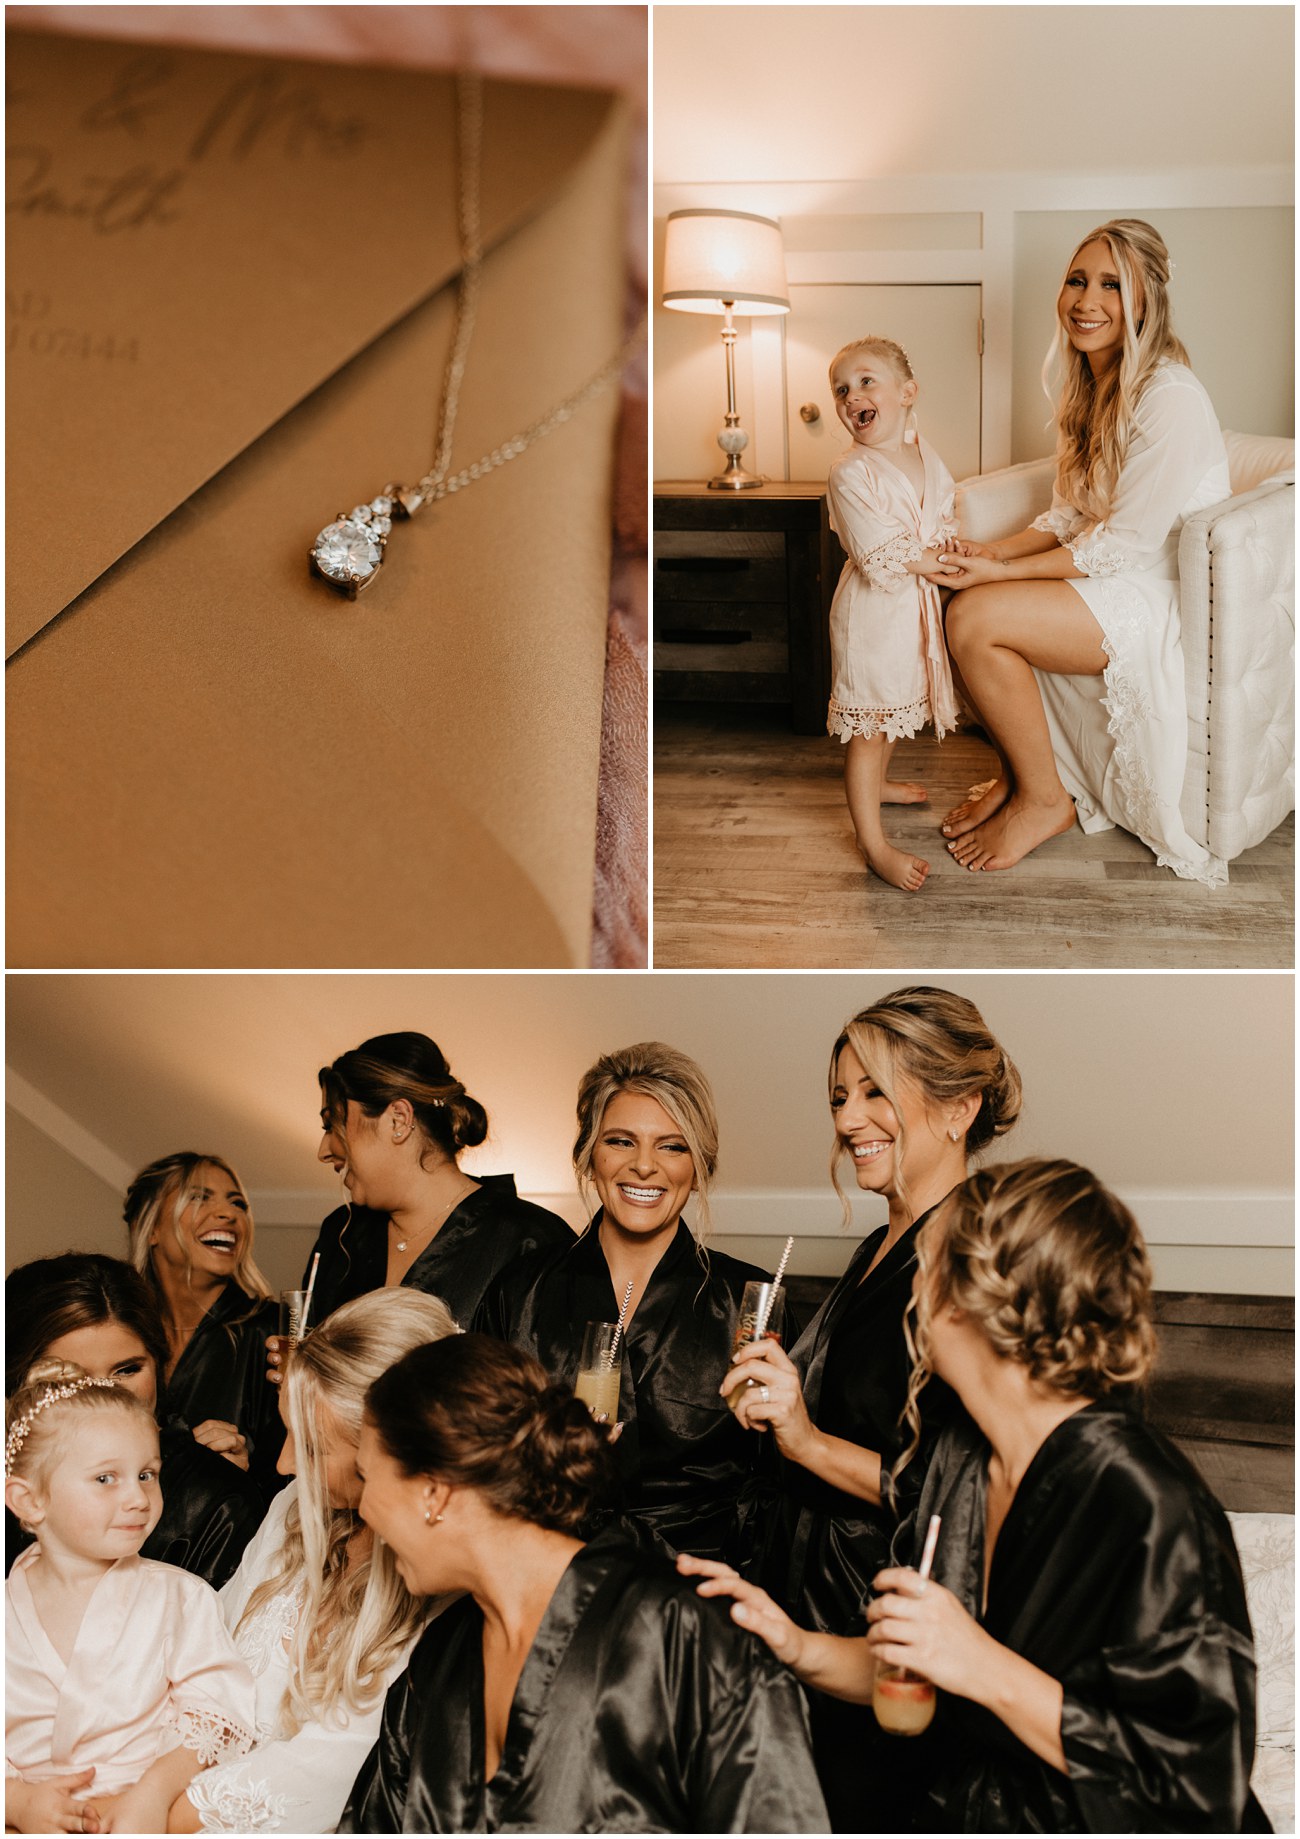 Collage of Bride, her details, and her wedding party in the bridal suite at Trout Lake wedding